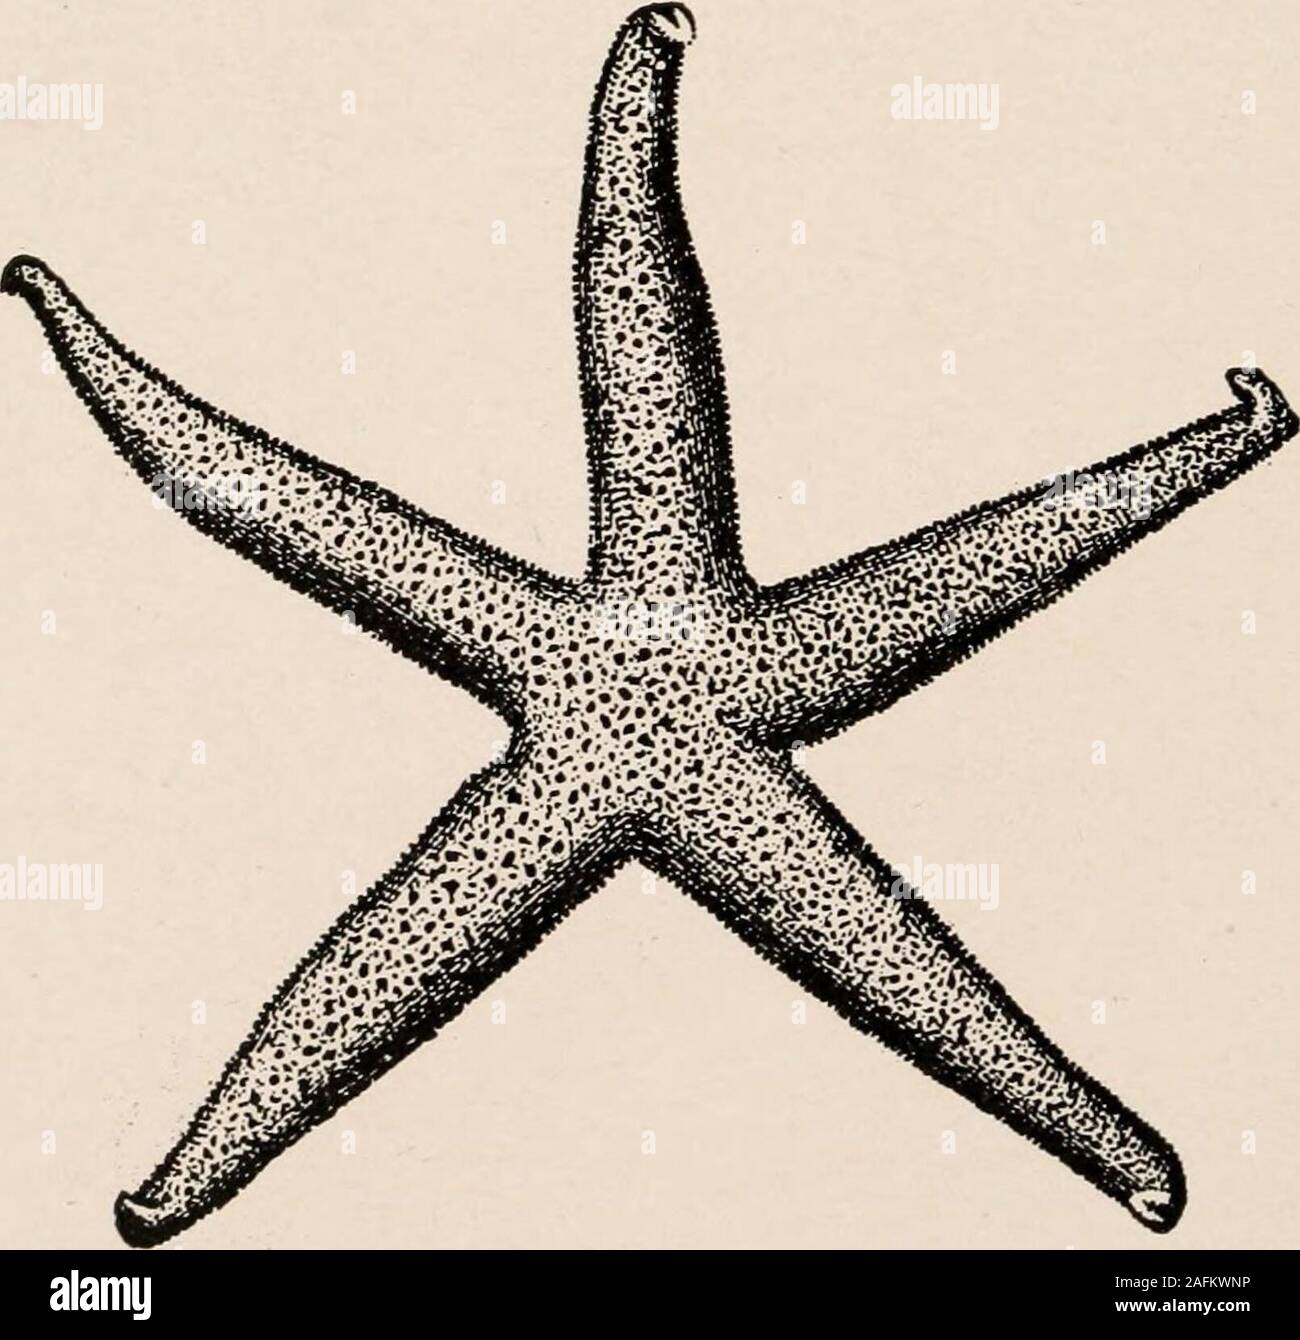 . Introduction to zoology; a guide to the study of animals, for the use of secondary schools;. FIG. 181. — Ctibrella sanguinolenta. Nat. size. From Leuuis. THE STARFISH AND ITS ALLIES 197 Stock Photo